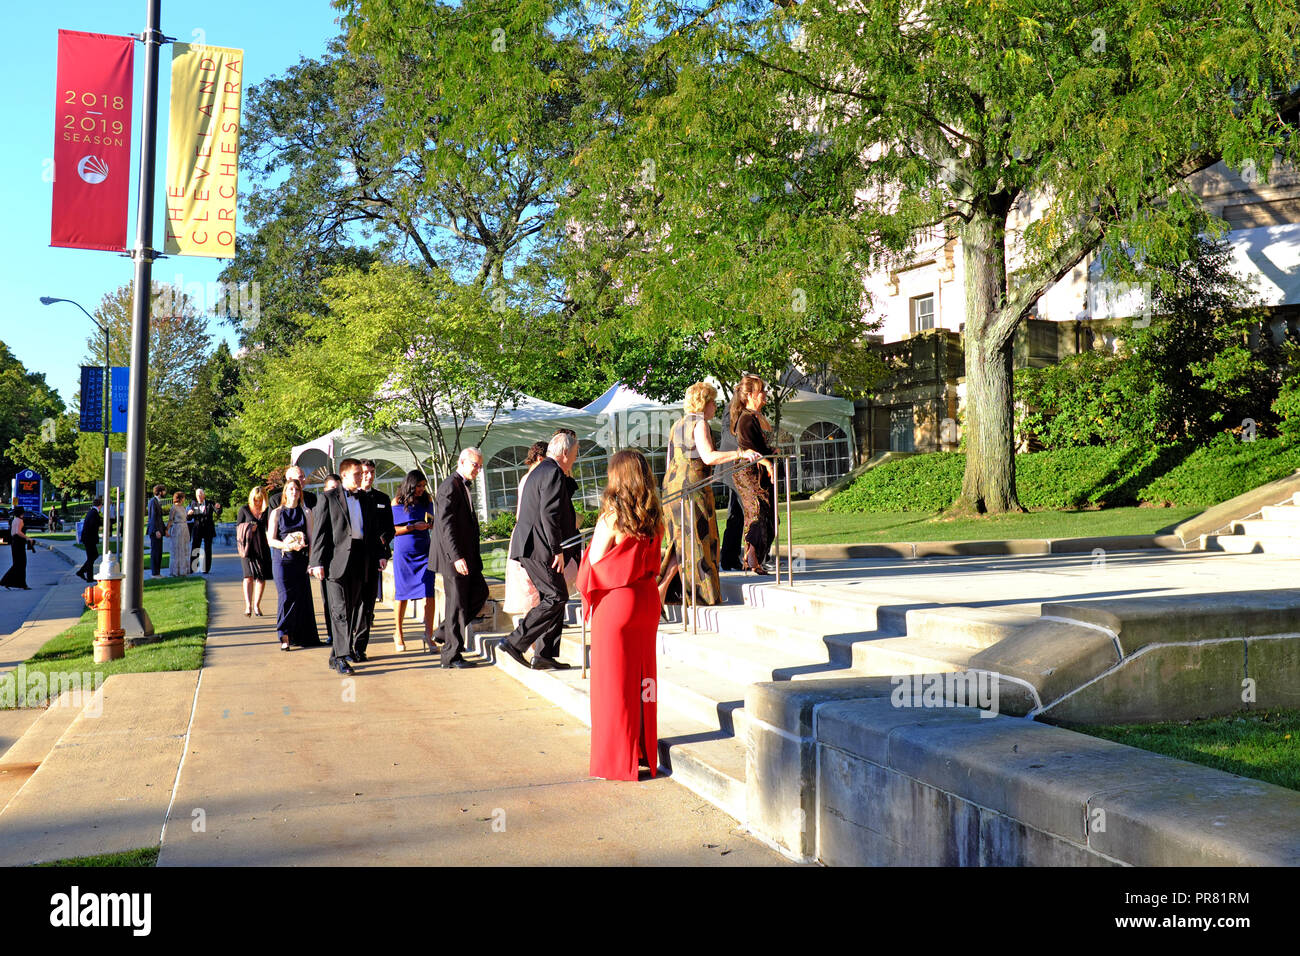 Cleveland, Ohio, USA. 29th Sept, 2018.  Patrons arrive at Severance Hall in Cleveland, Ohio for the Cleveland Orchestra 100th Anniversary Gala. Credit: Mark Kanning/Alamy Live News. Stock Photo